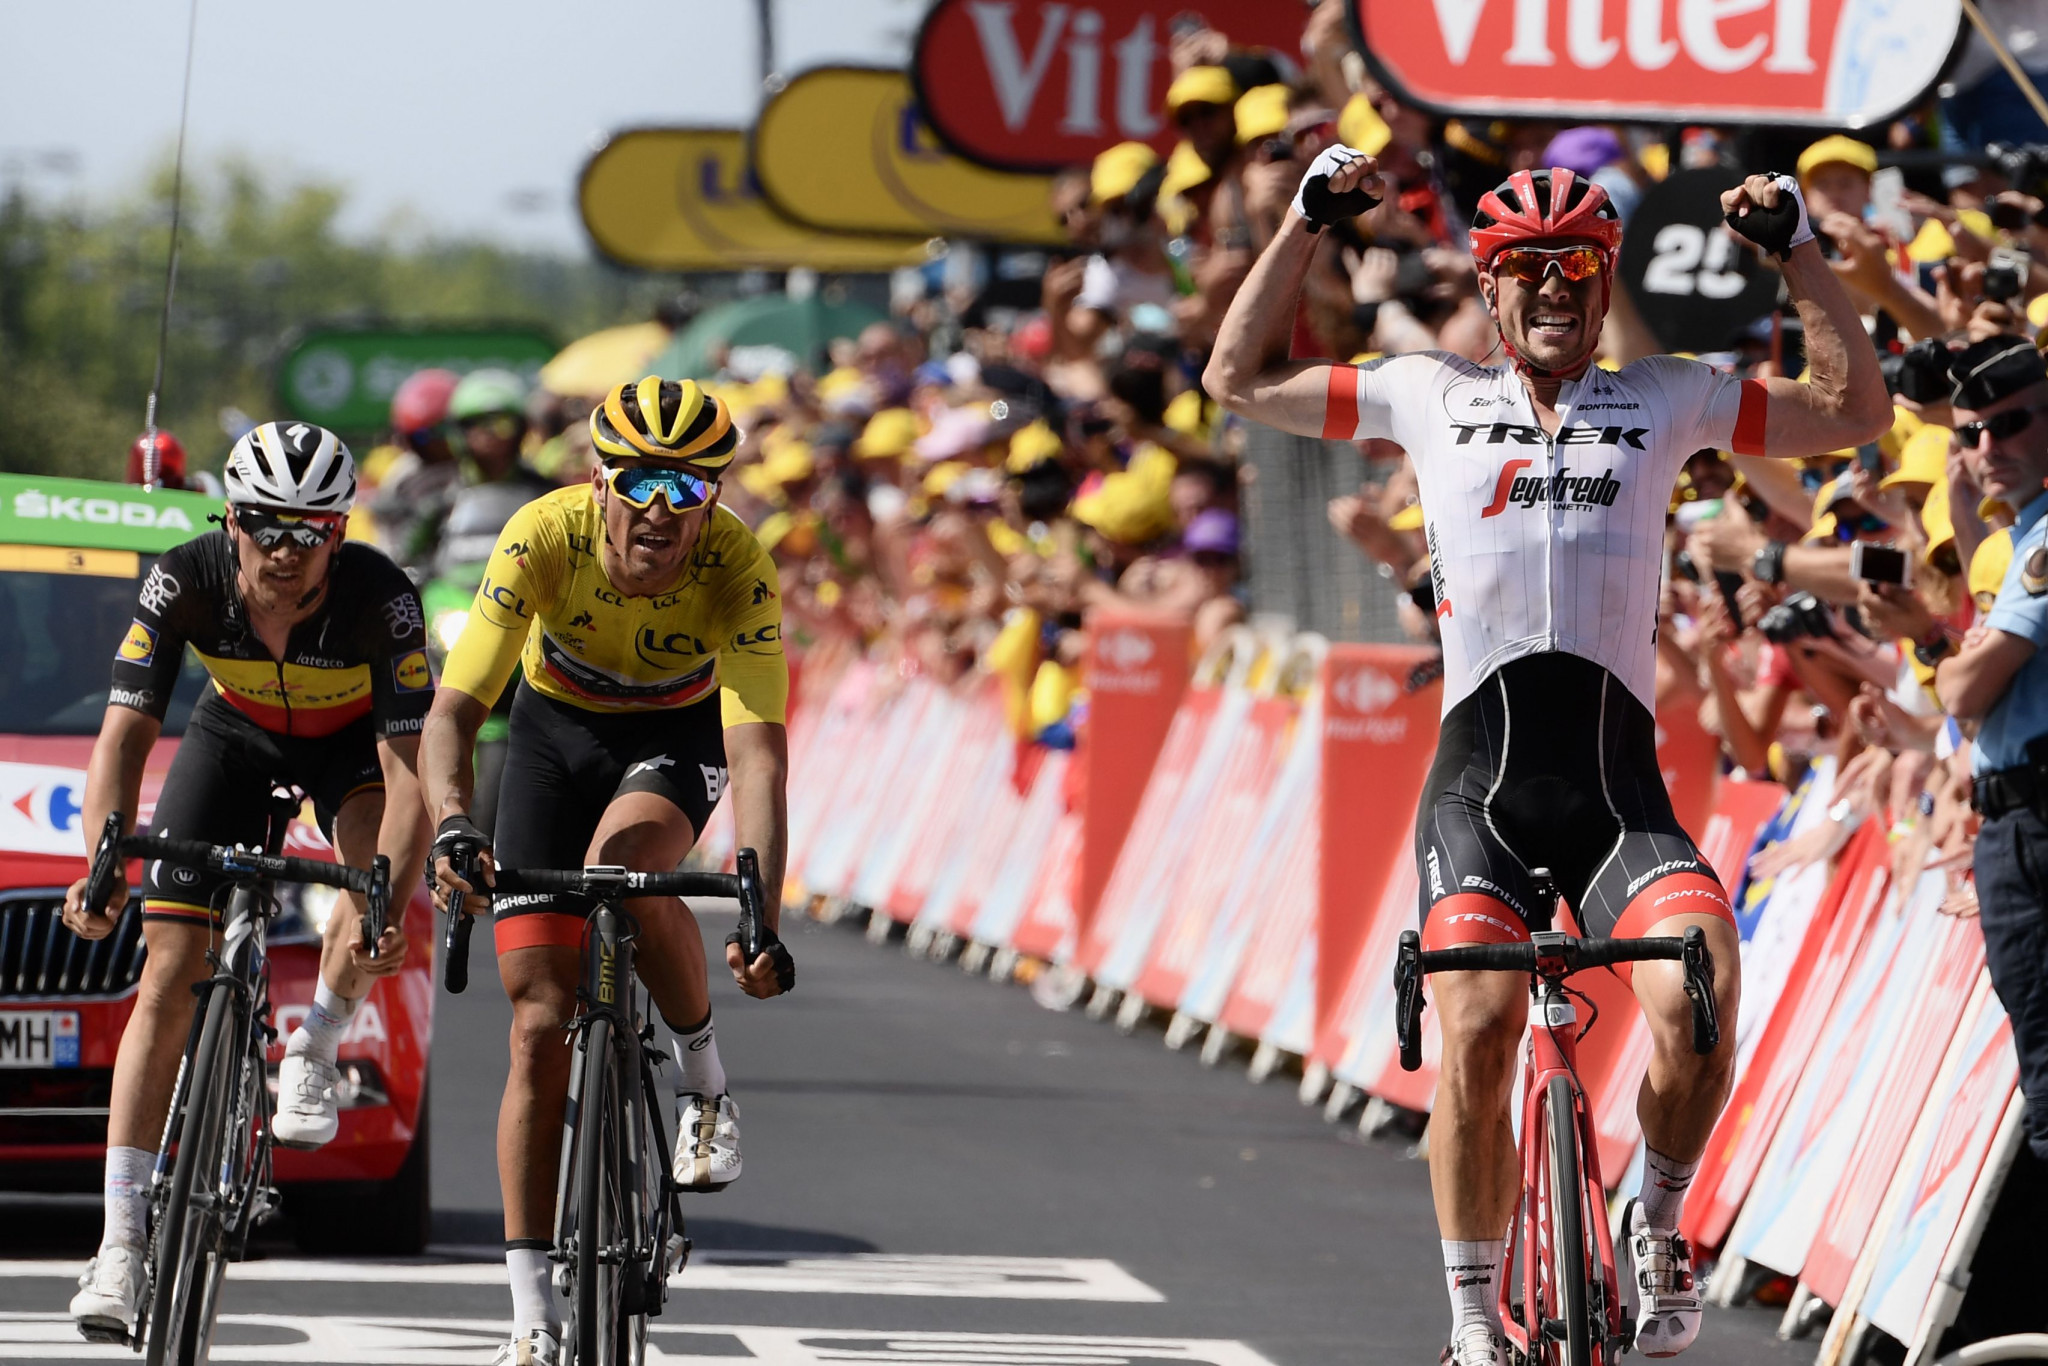 John Degenkolb earned his first Tour de France stage victory ©Getty Images